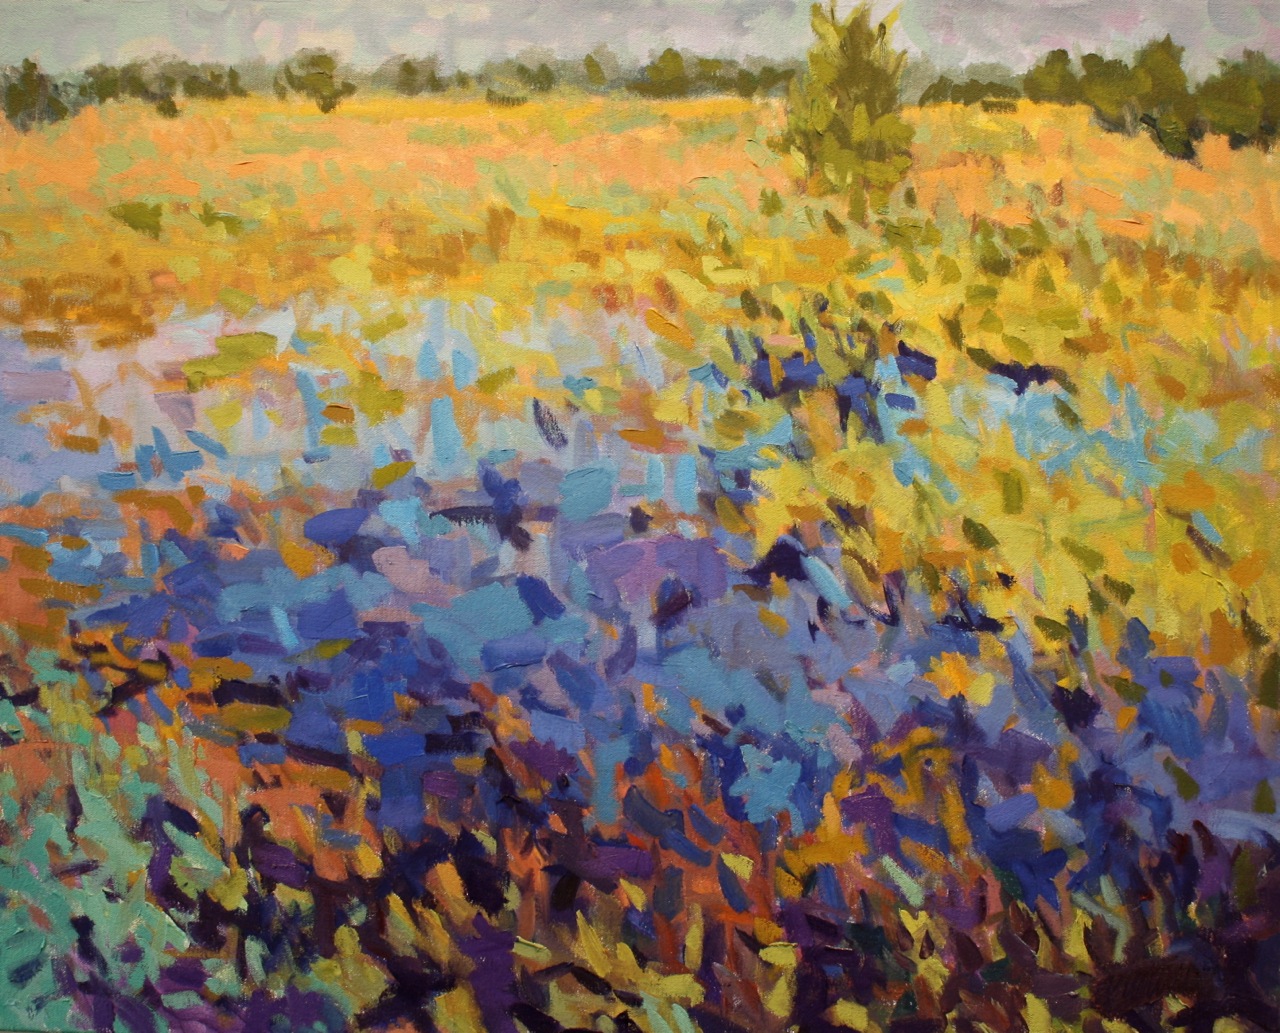 Marsh, Yellows and Blues by Priscilla Whitlock at Les Yeux du Monde Art Gallery